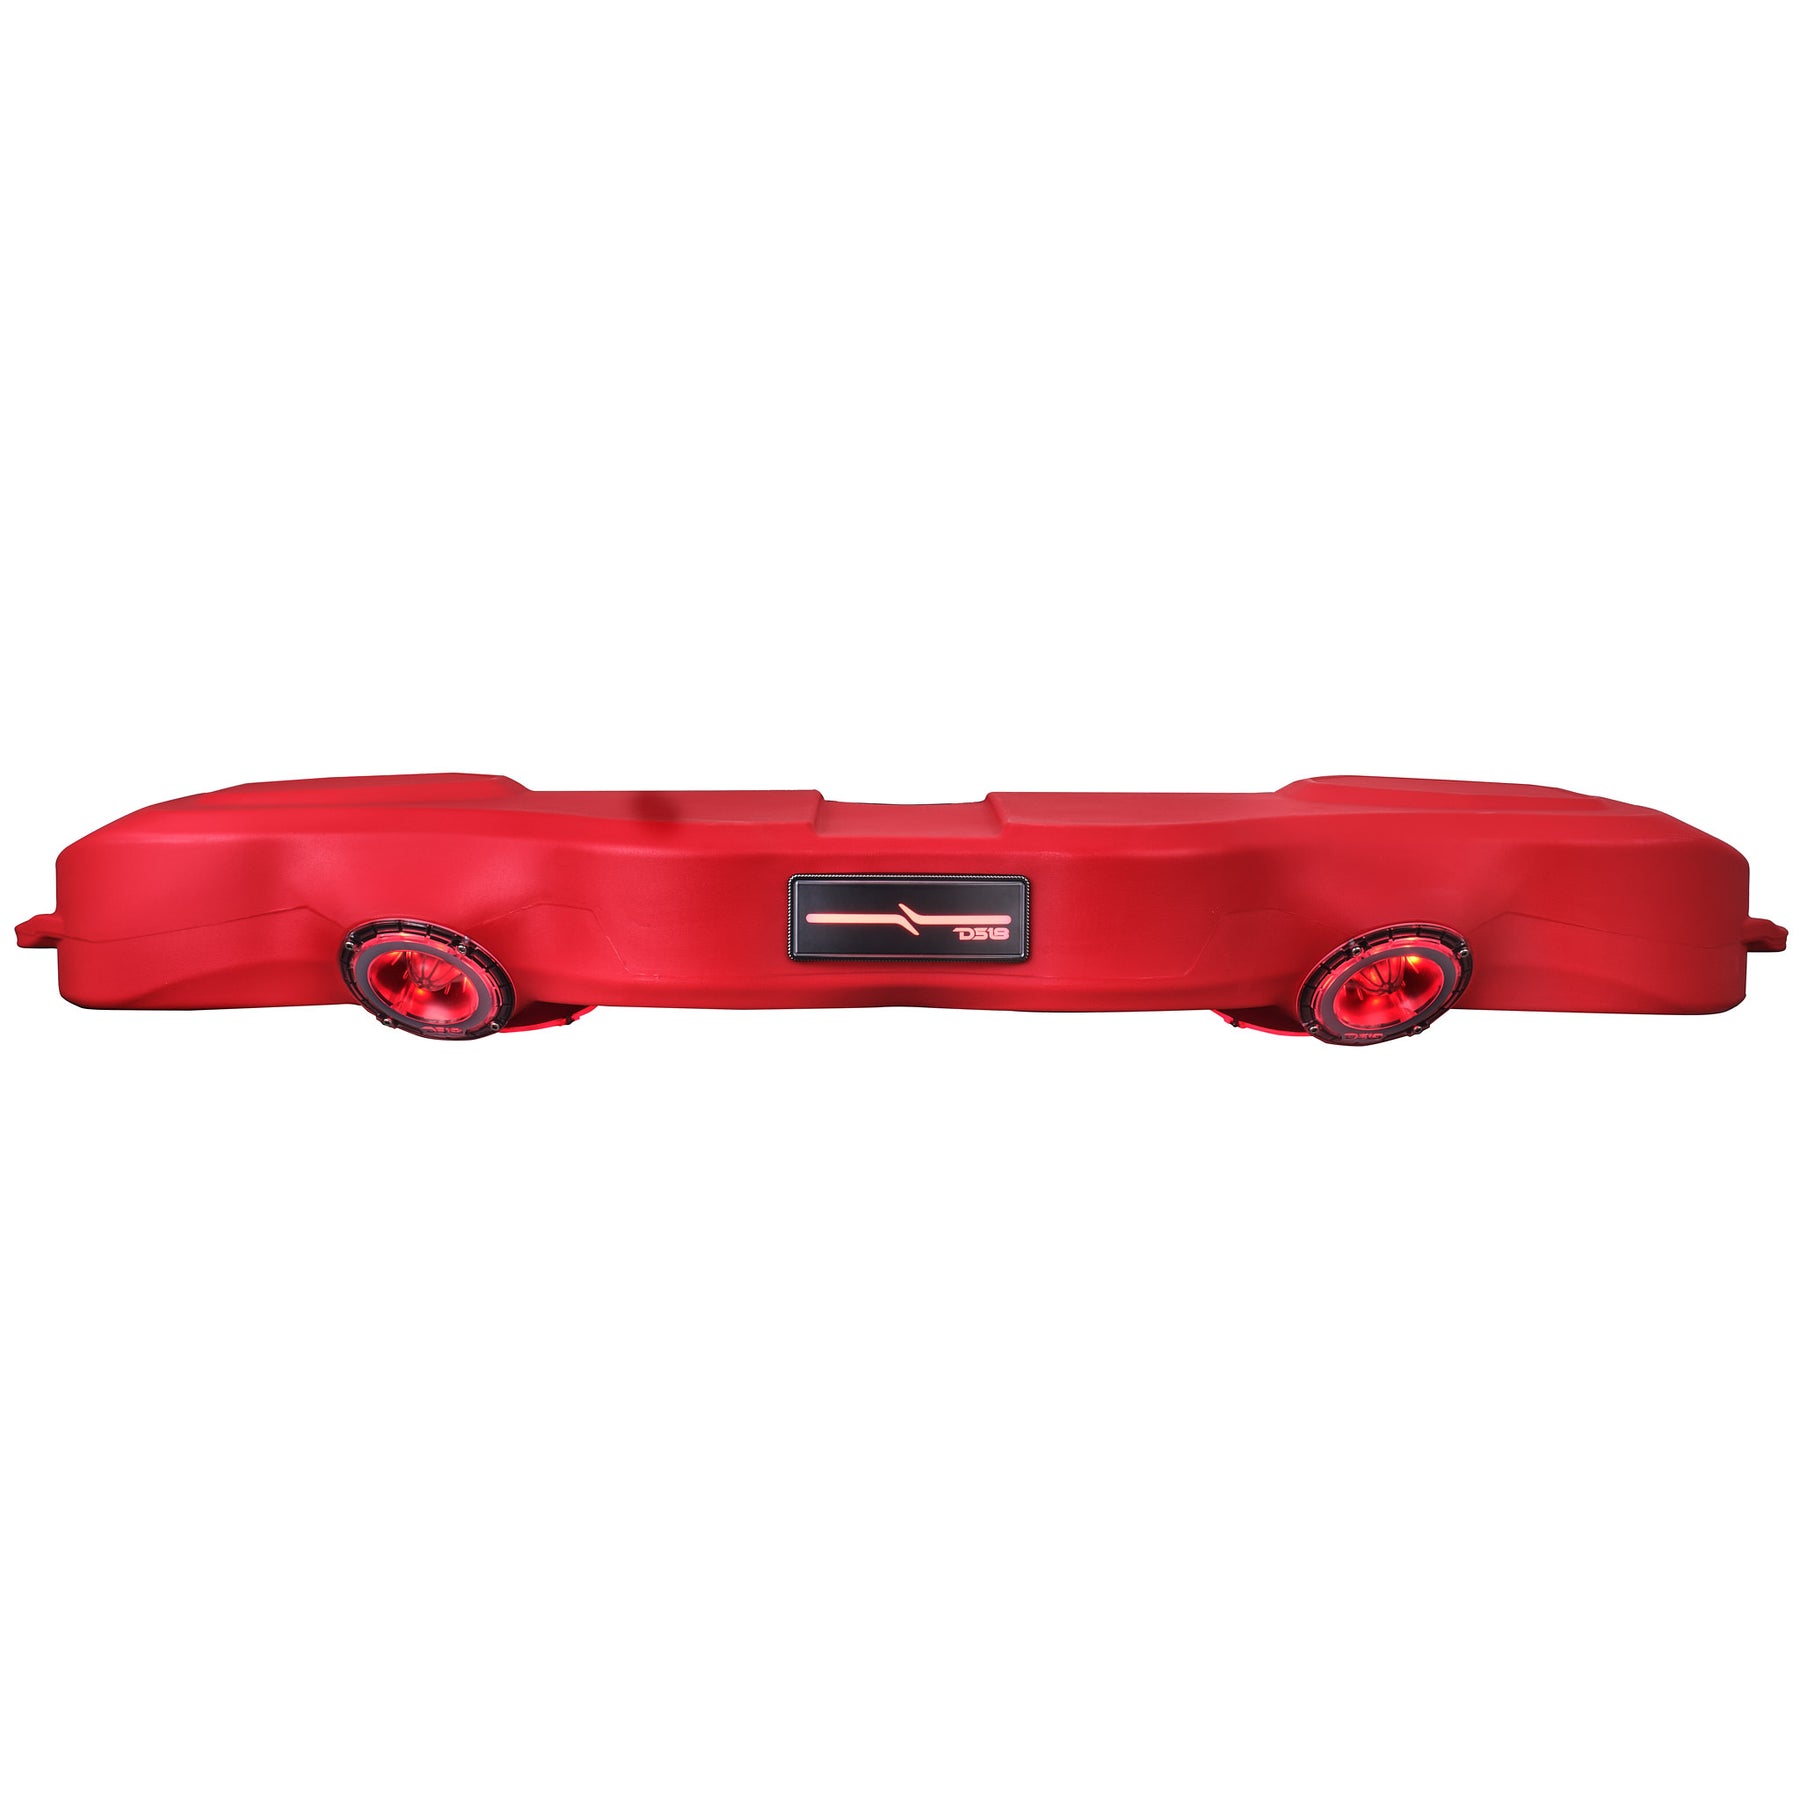 Jeep JL/JLU,JT Overhead Bar System Fits 4 X 8" Speakers (Not Included) and 4 X Tweeters PRO-TW4L and Harness Included - RED